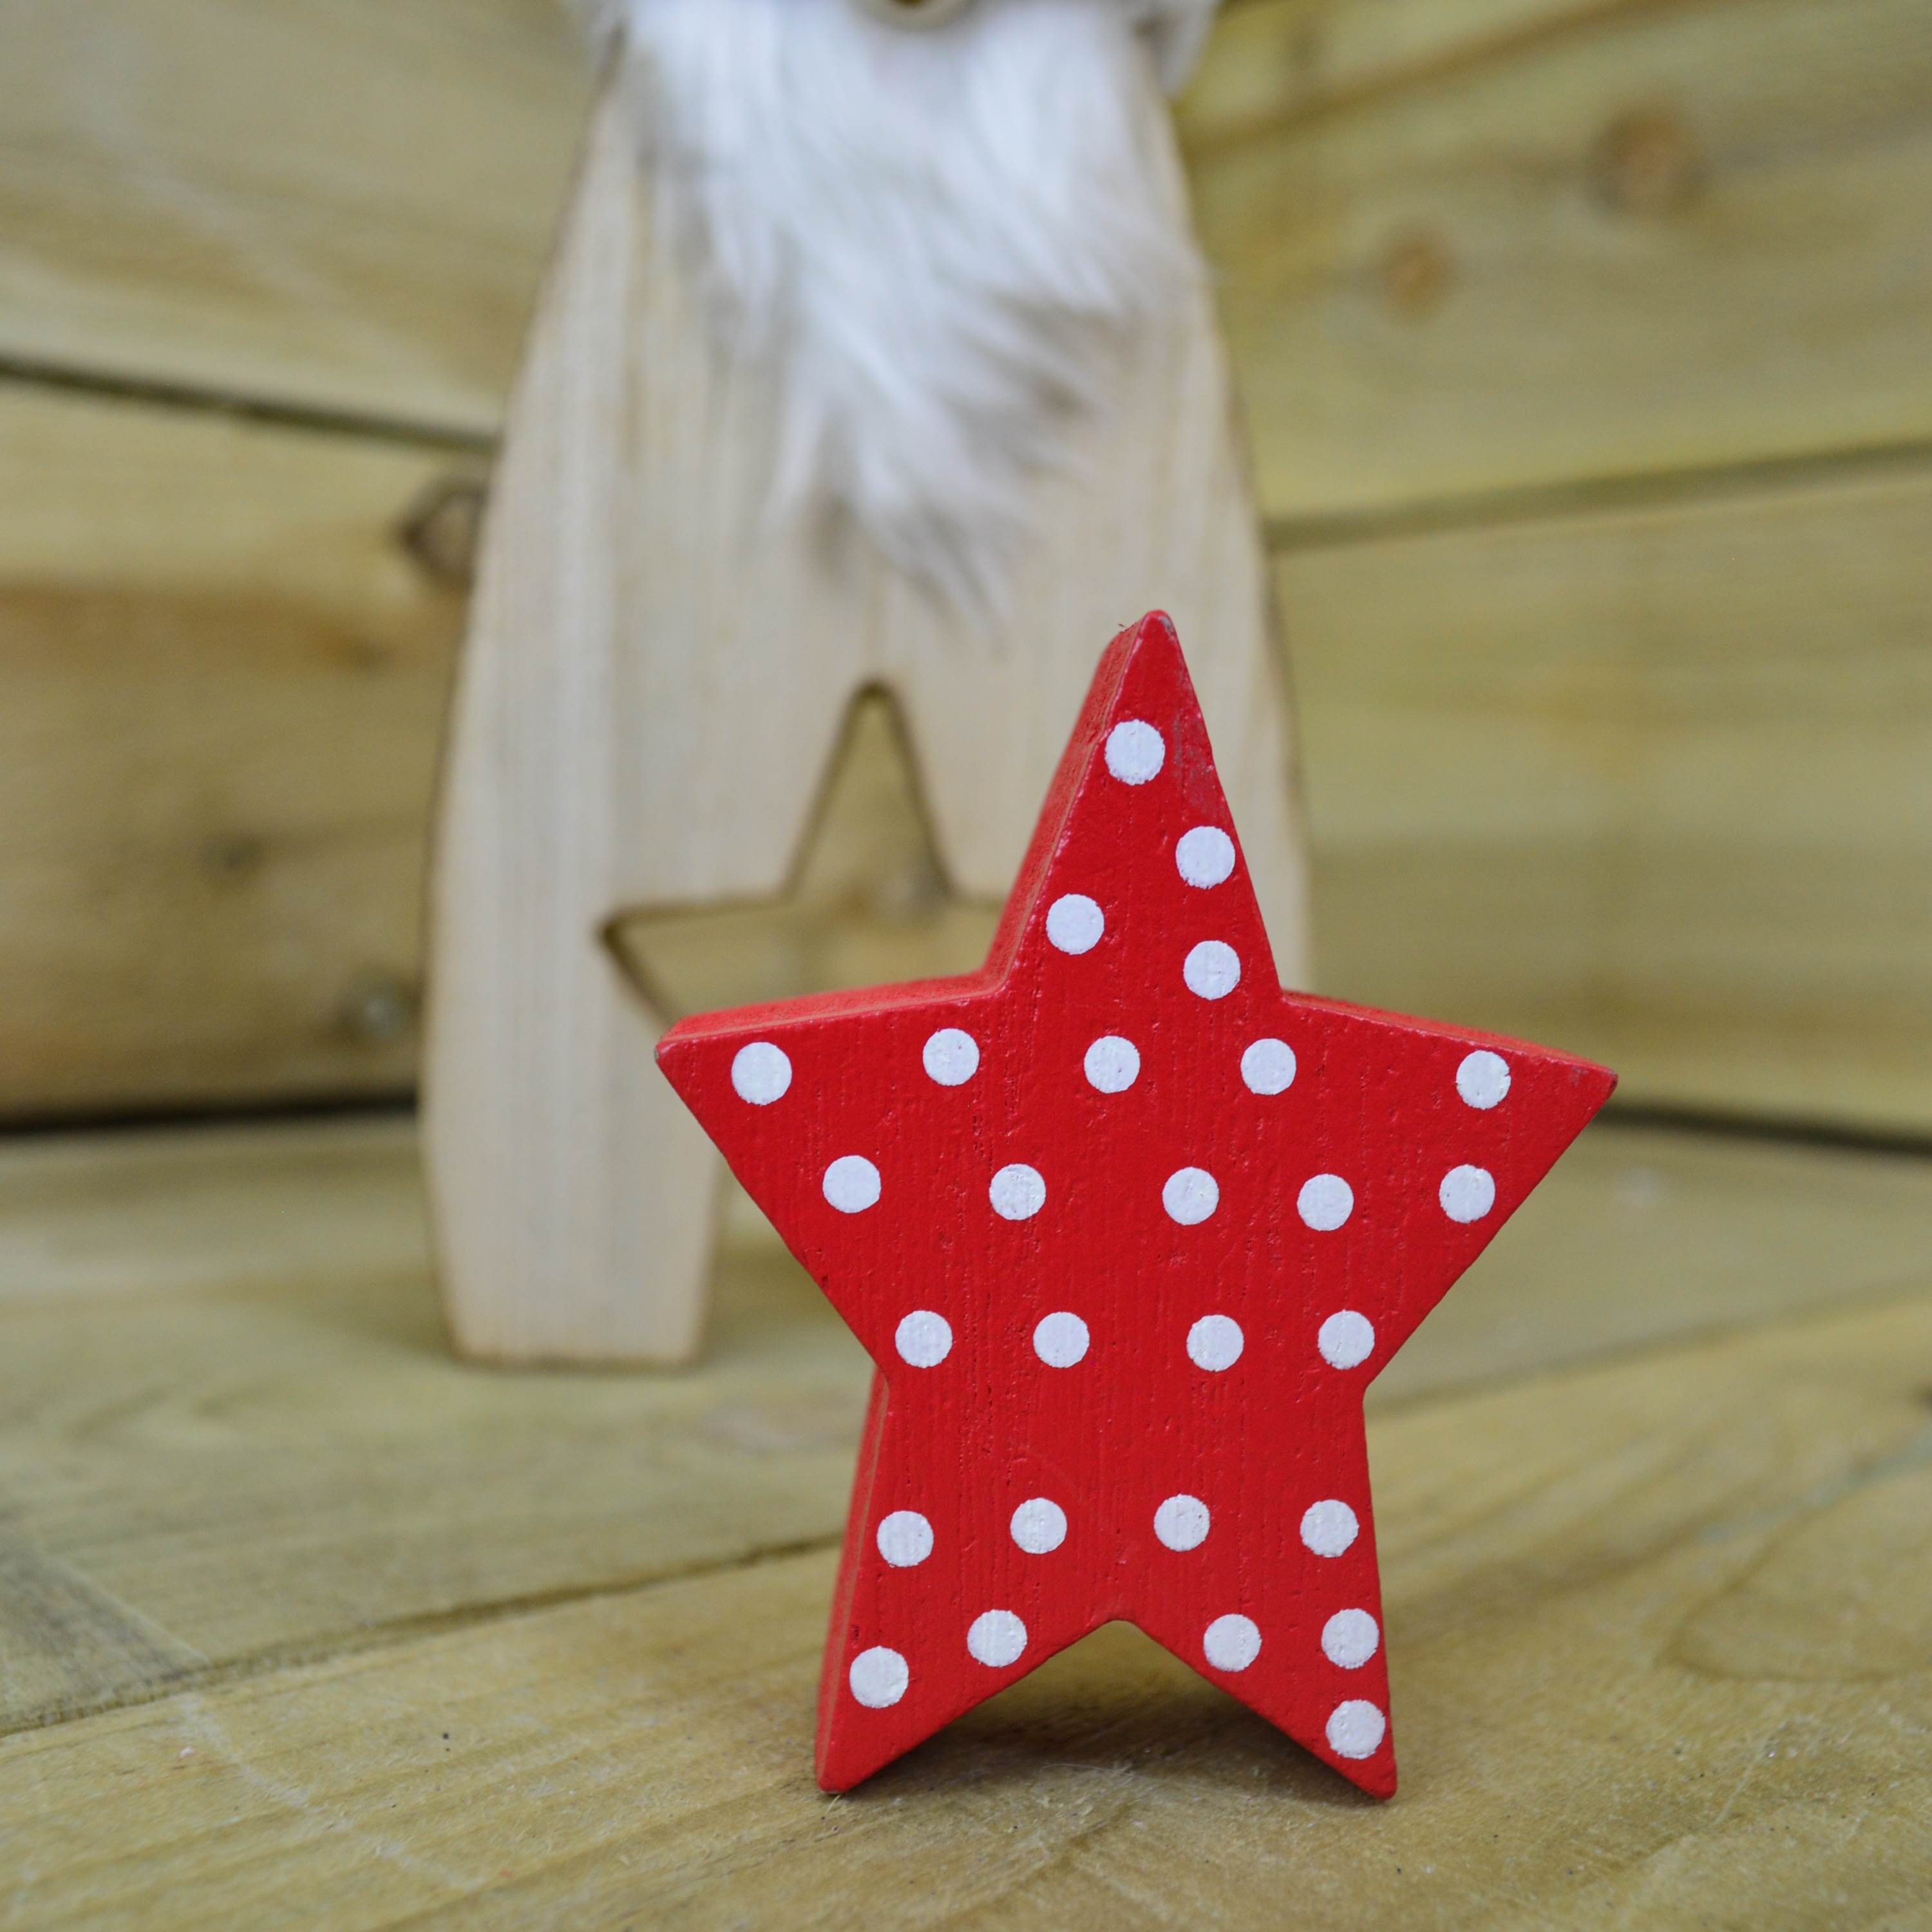 26cm Wooden Gonk Christmas Book End Ornaments - Red Star